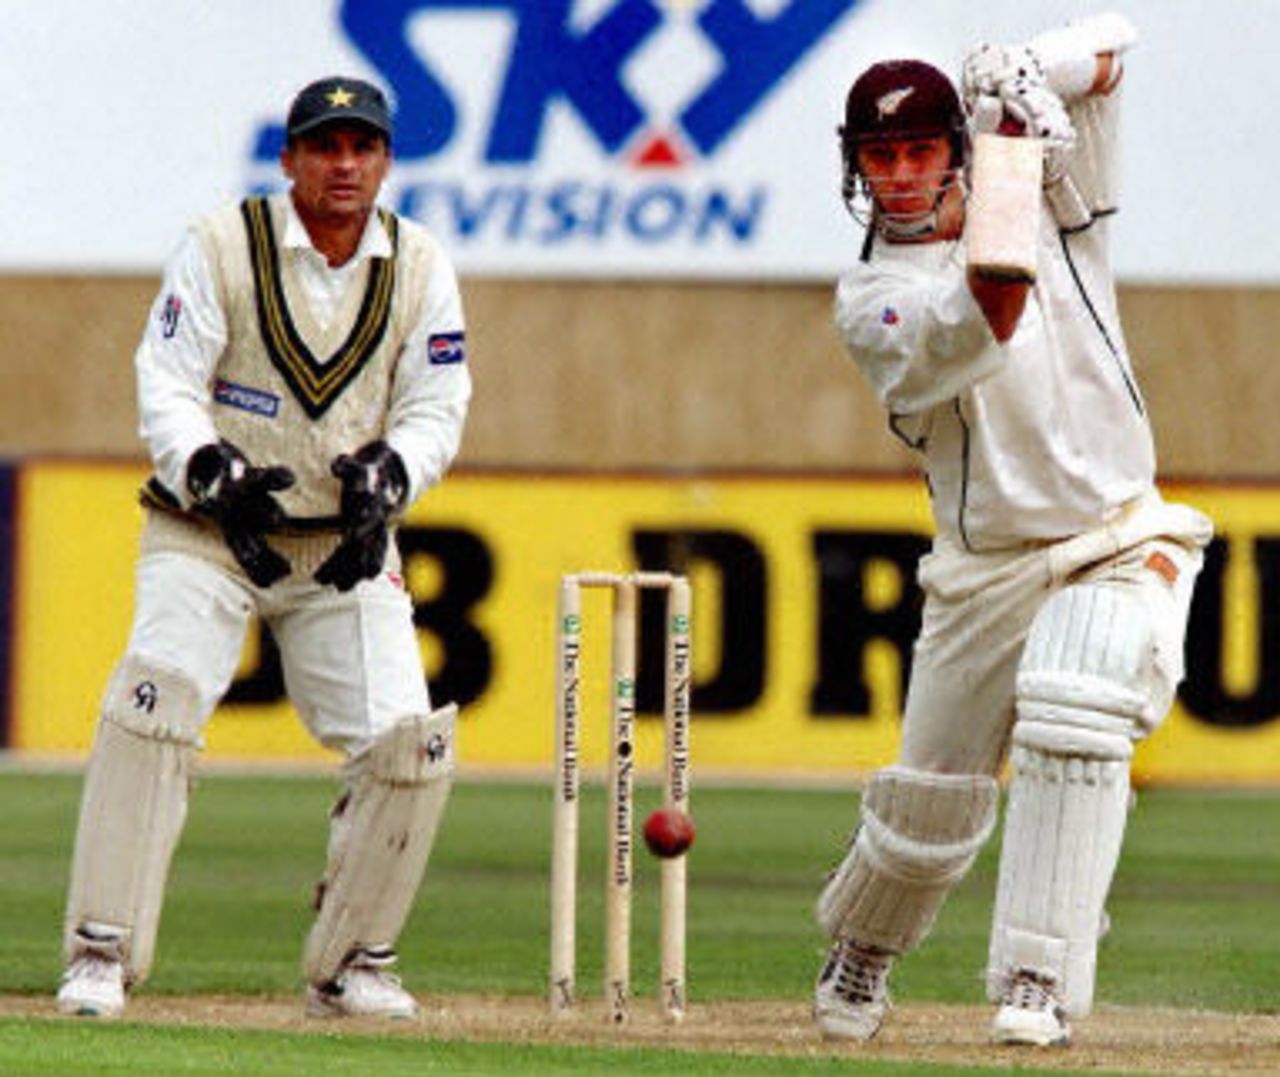 Mathew Sinclair drives a ball towards the boundary on the way to his double century as Moin Khan looks on, day 2, 2nd Test at Christchurch, 15-19 March 2001.